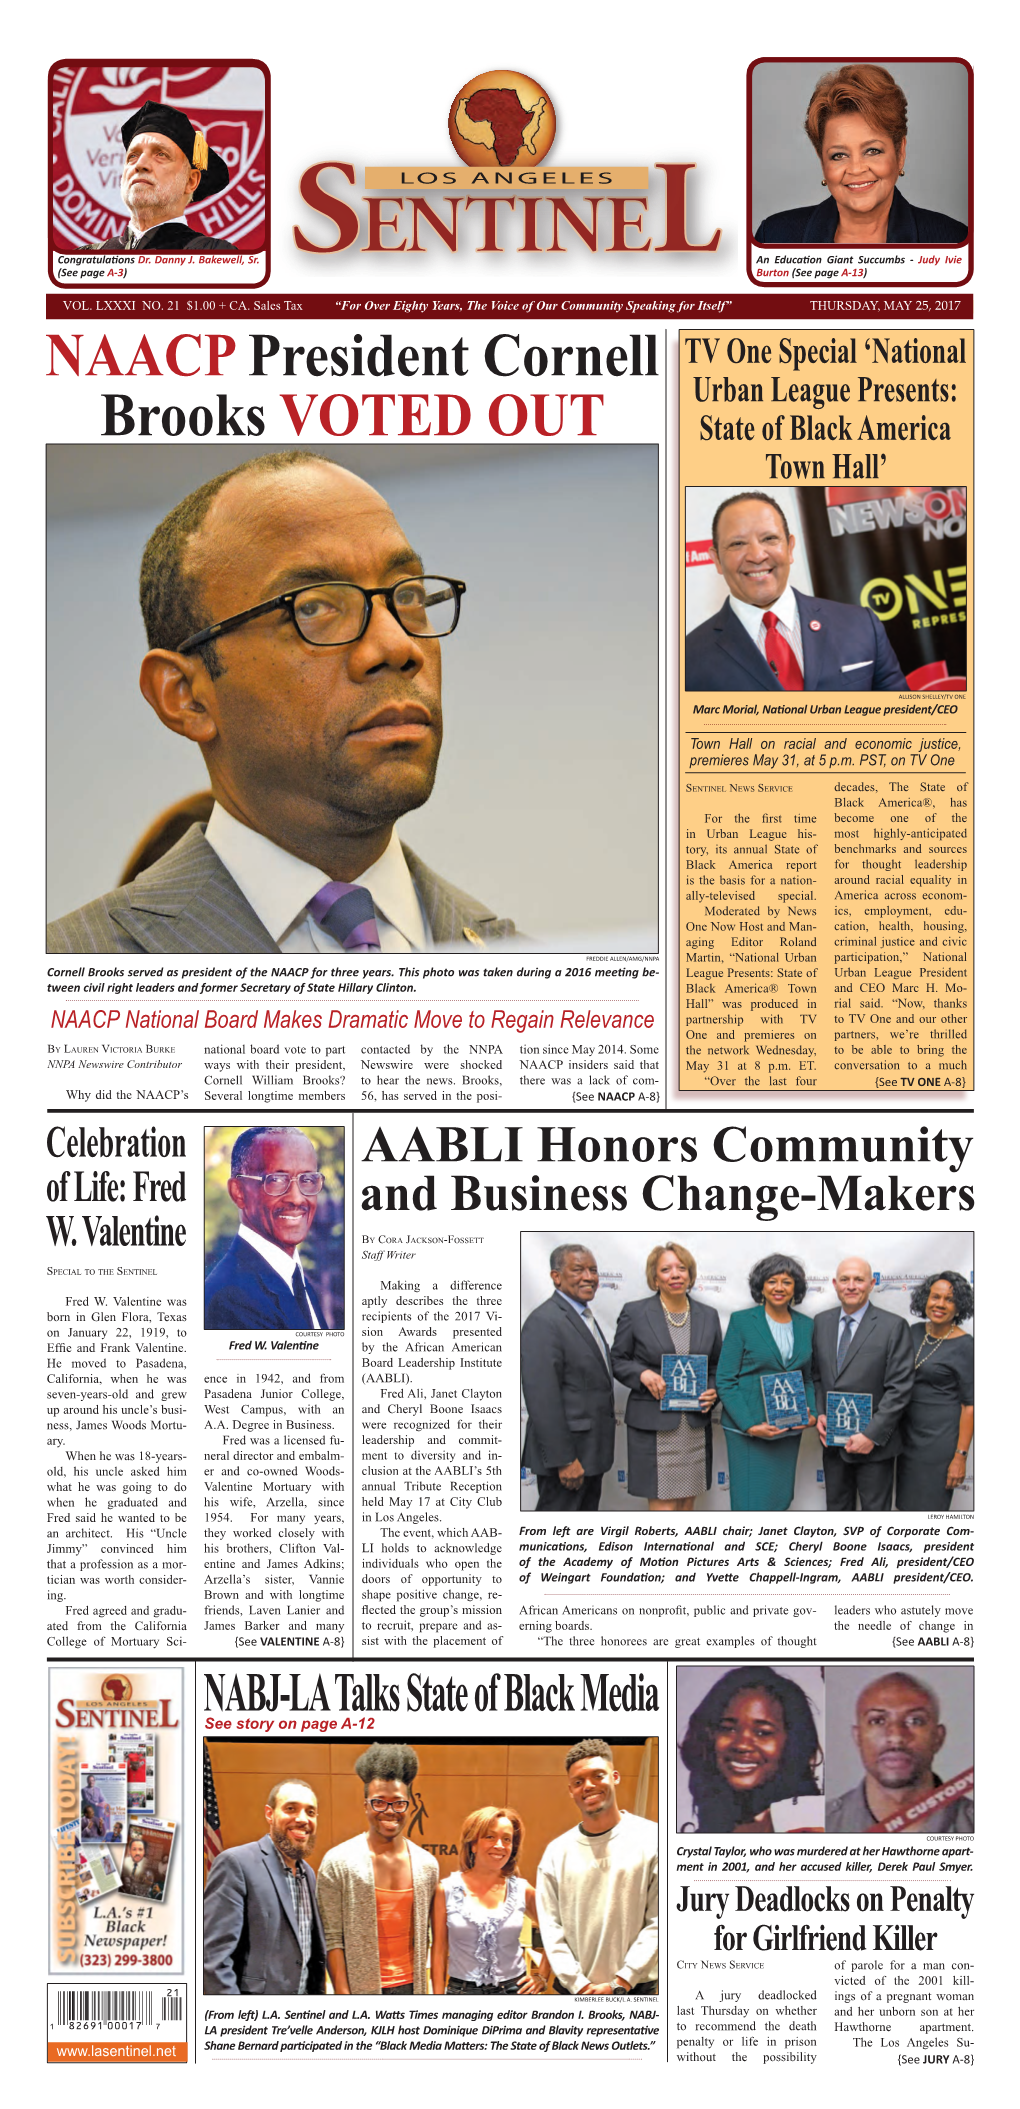 NAACP National Board Makes Dramatic Move to Regain Relevance